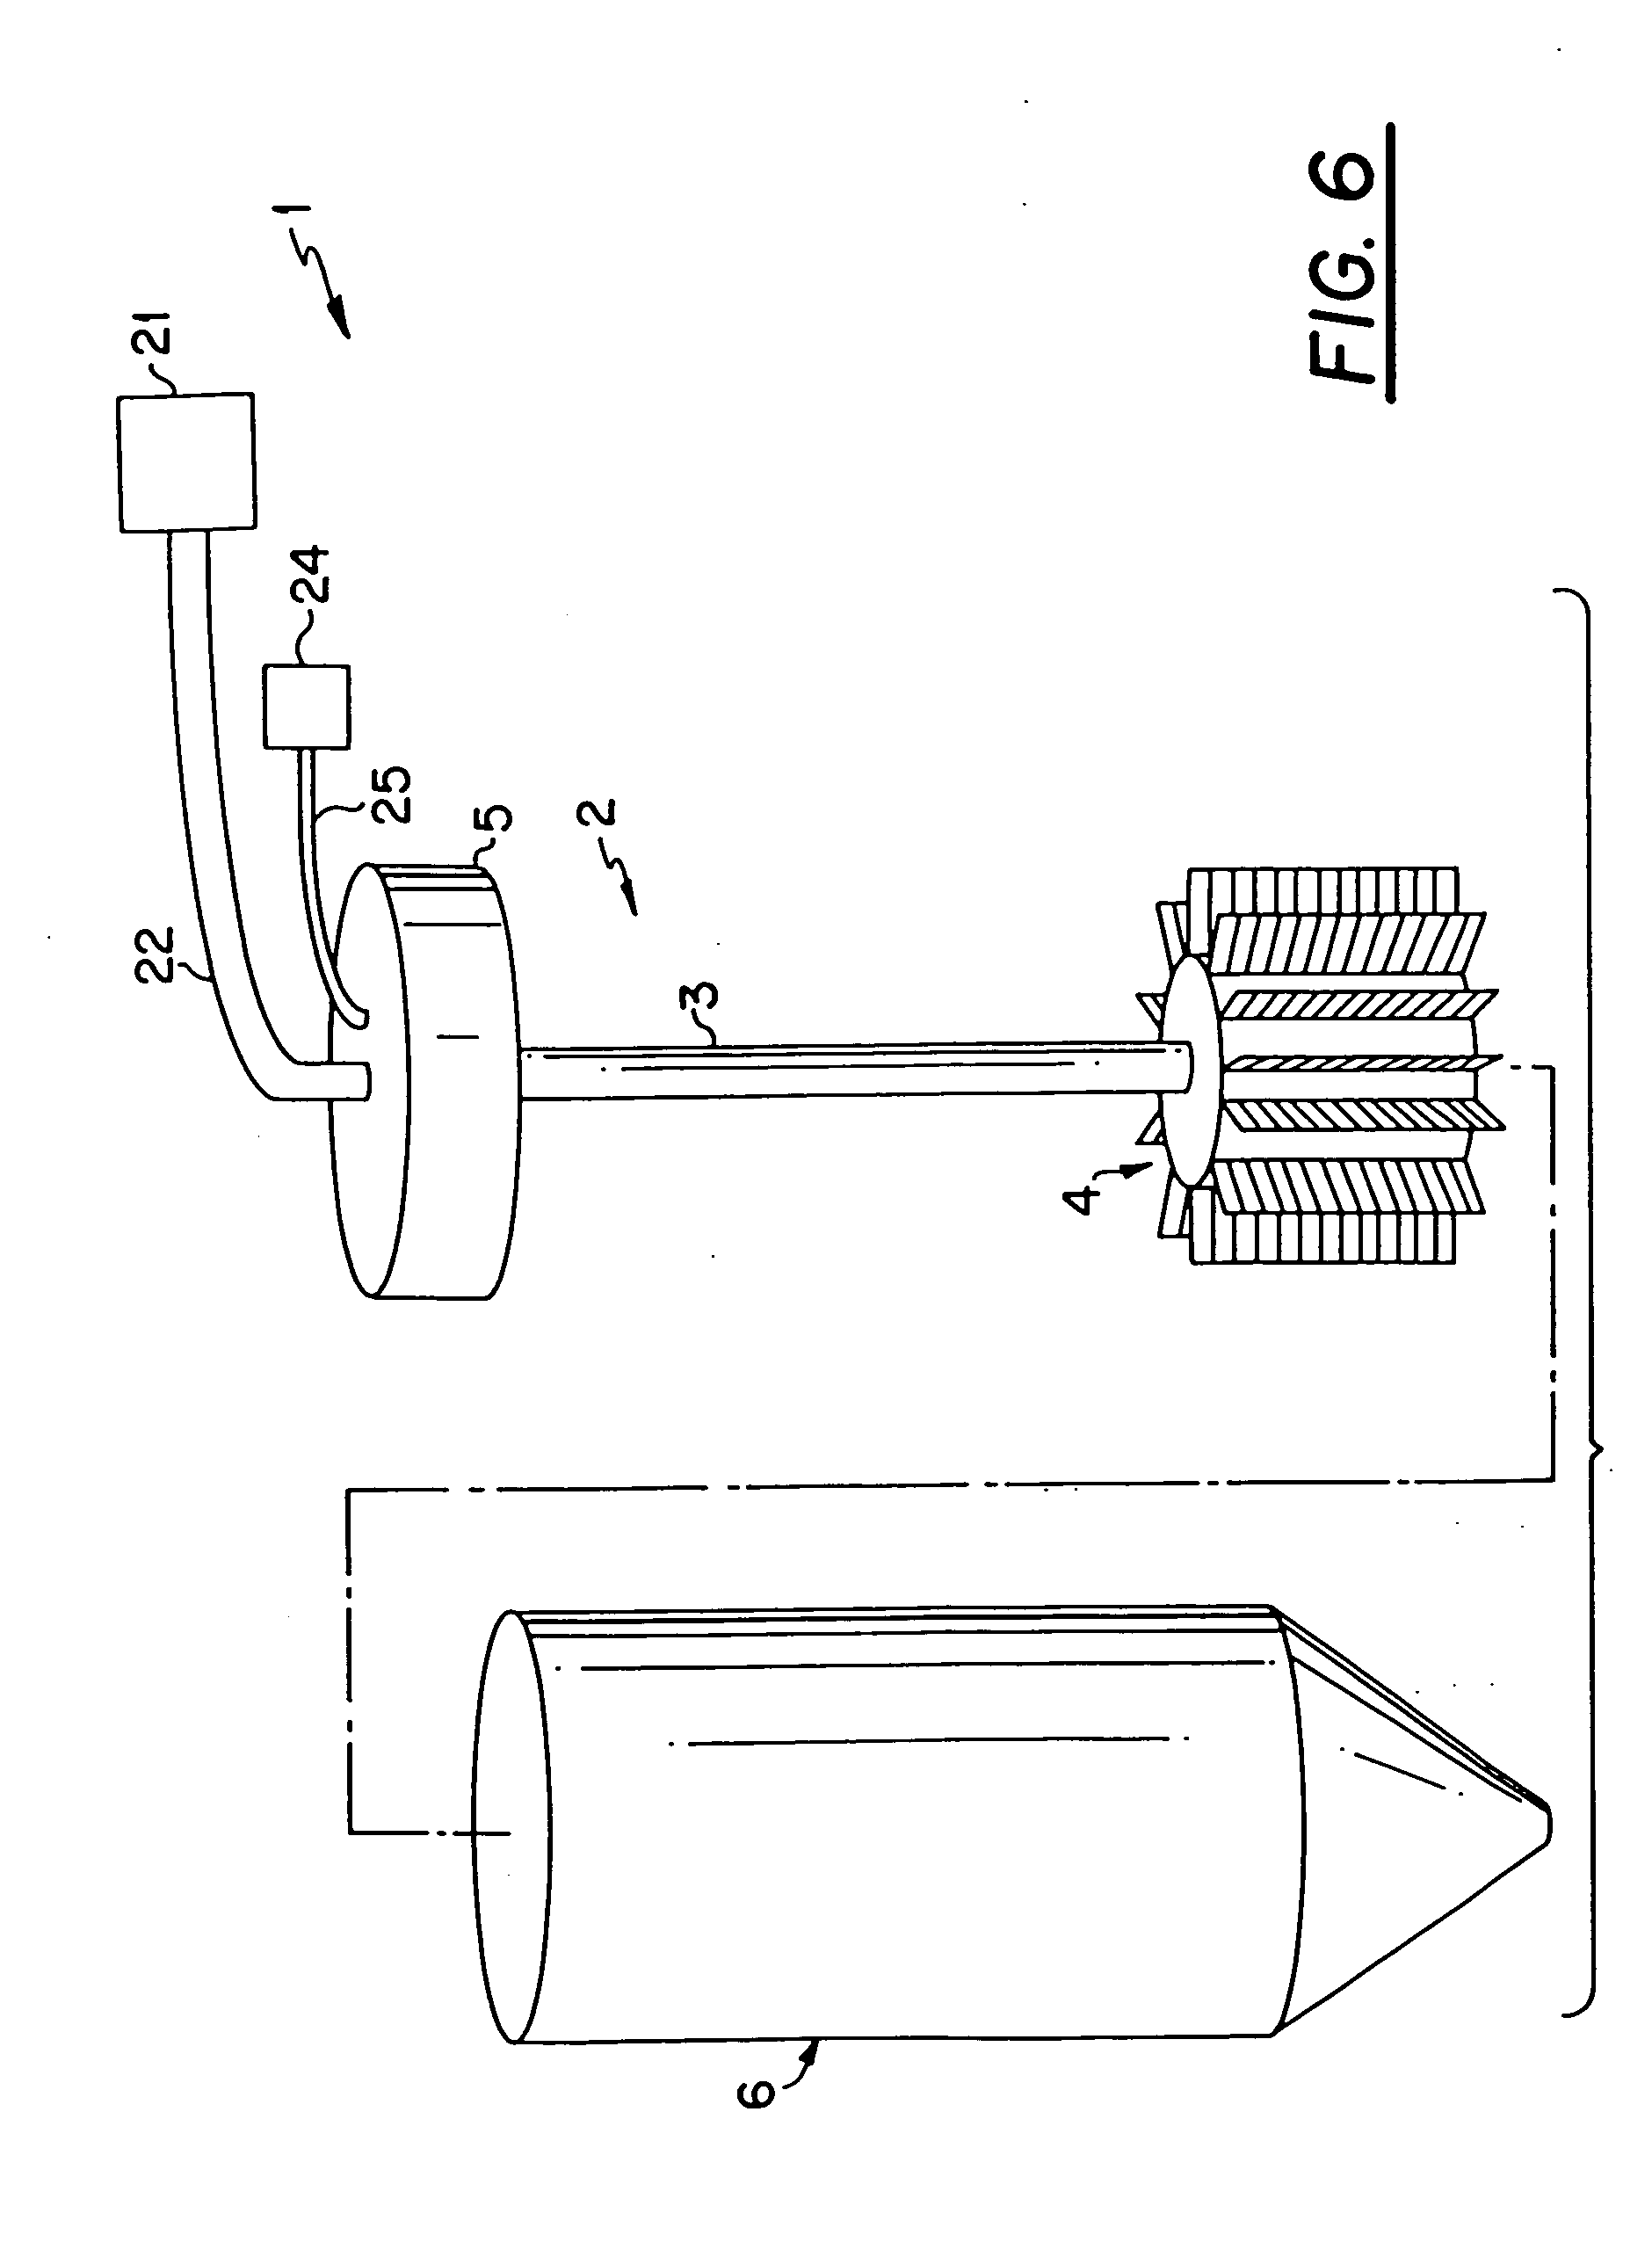 Purification method and apparatus